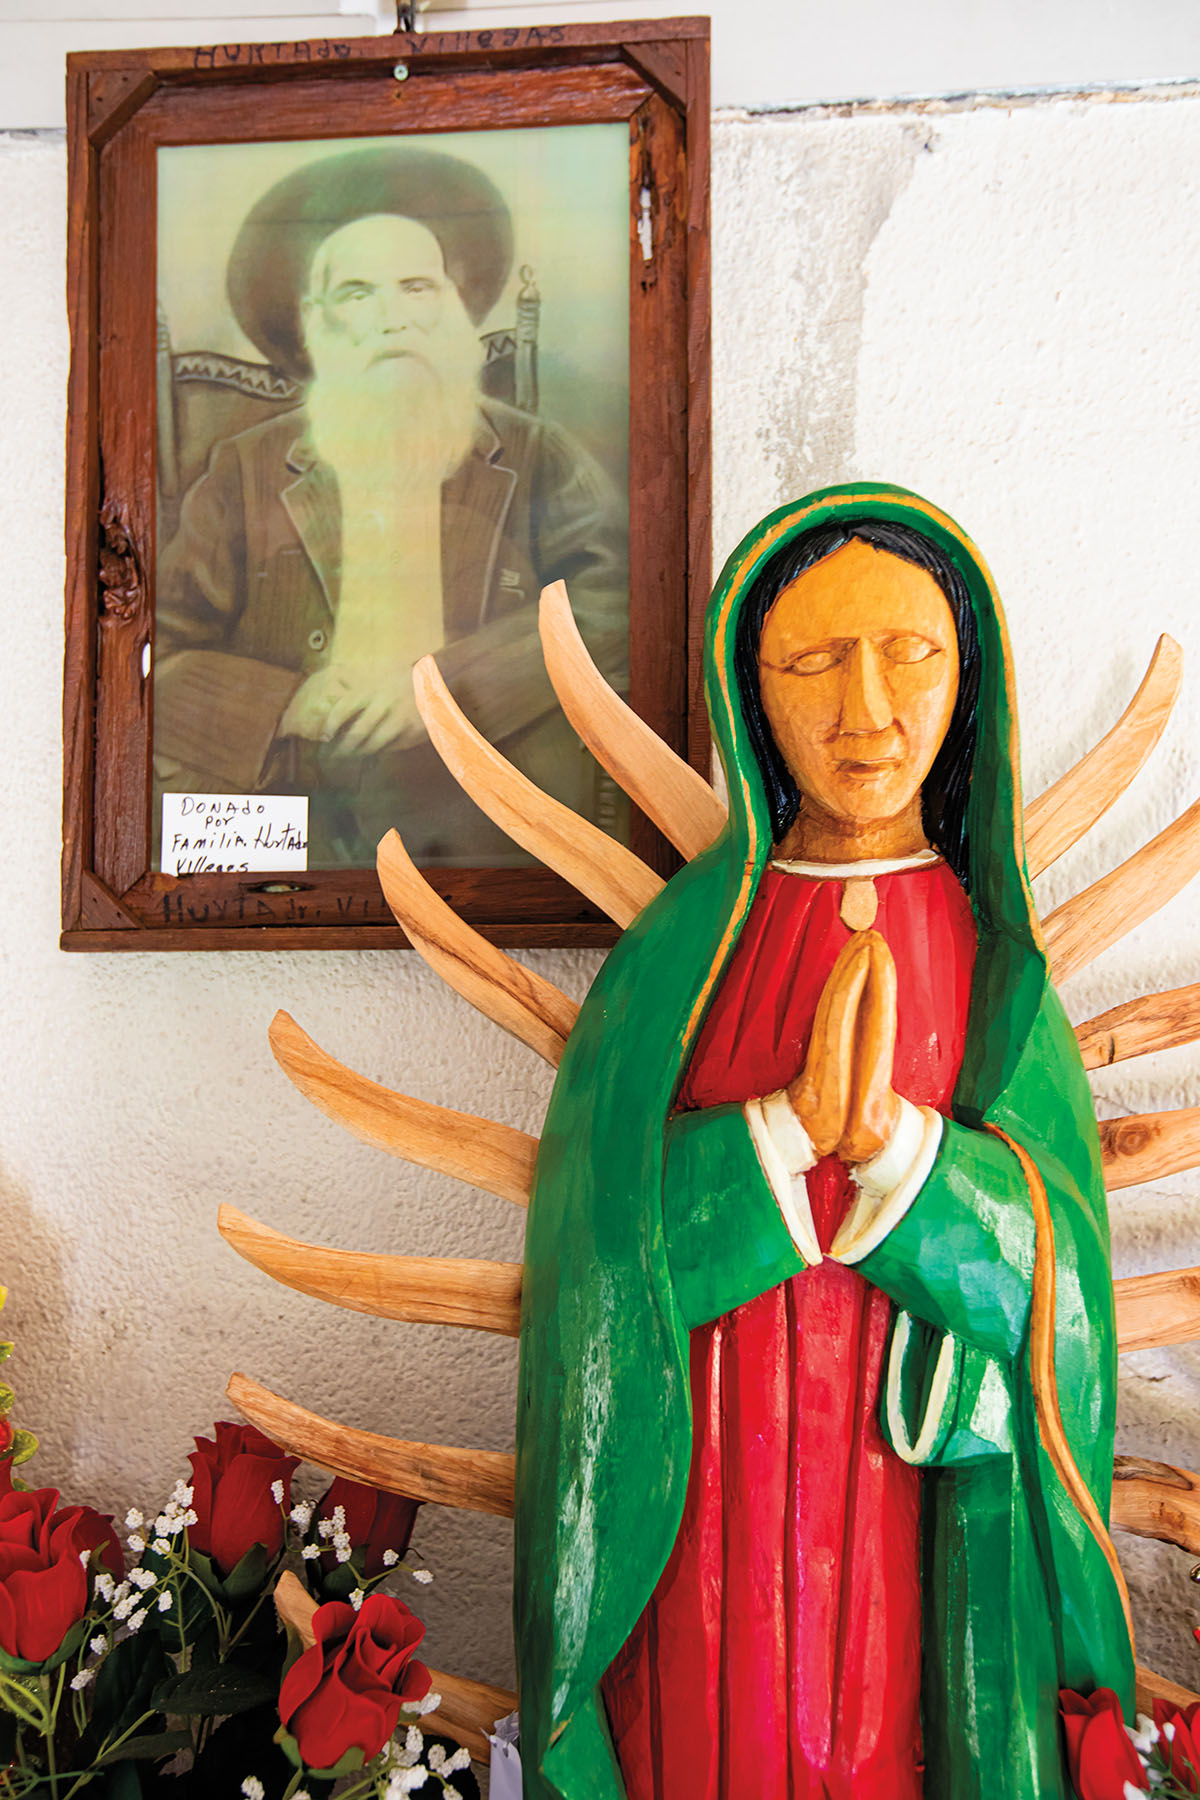 A wood-carved statue of Our Lady of Guadalupe dressed in a green robe and white dress, with a picture of Jaramillo in the background